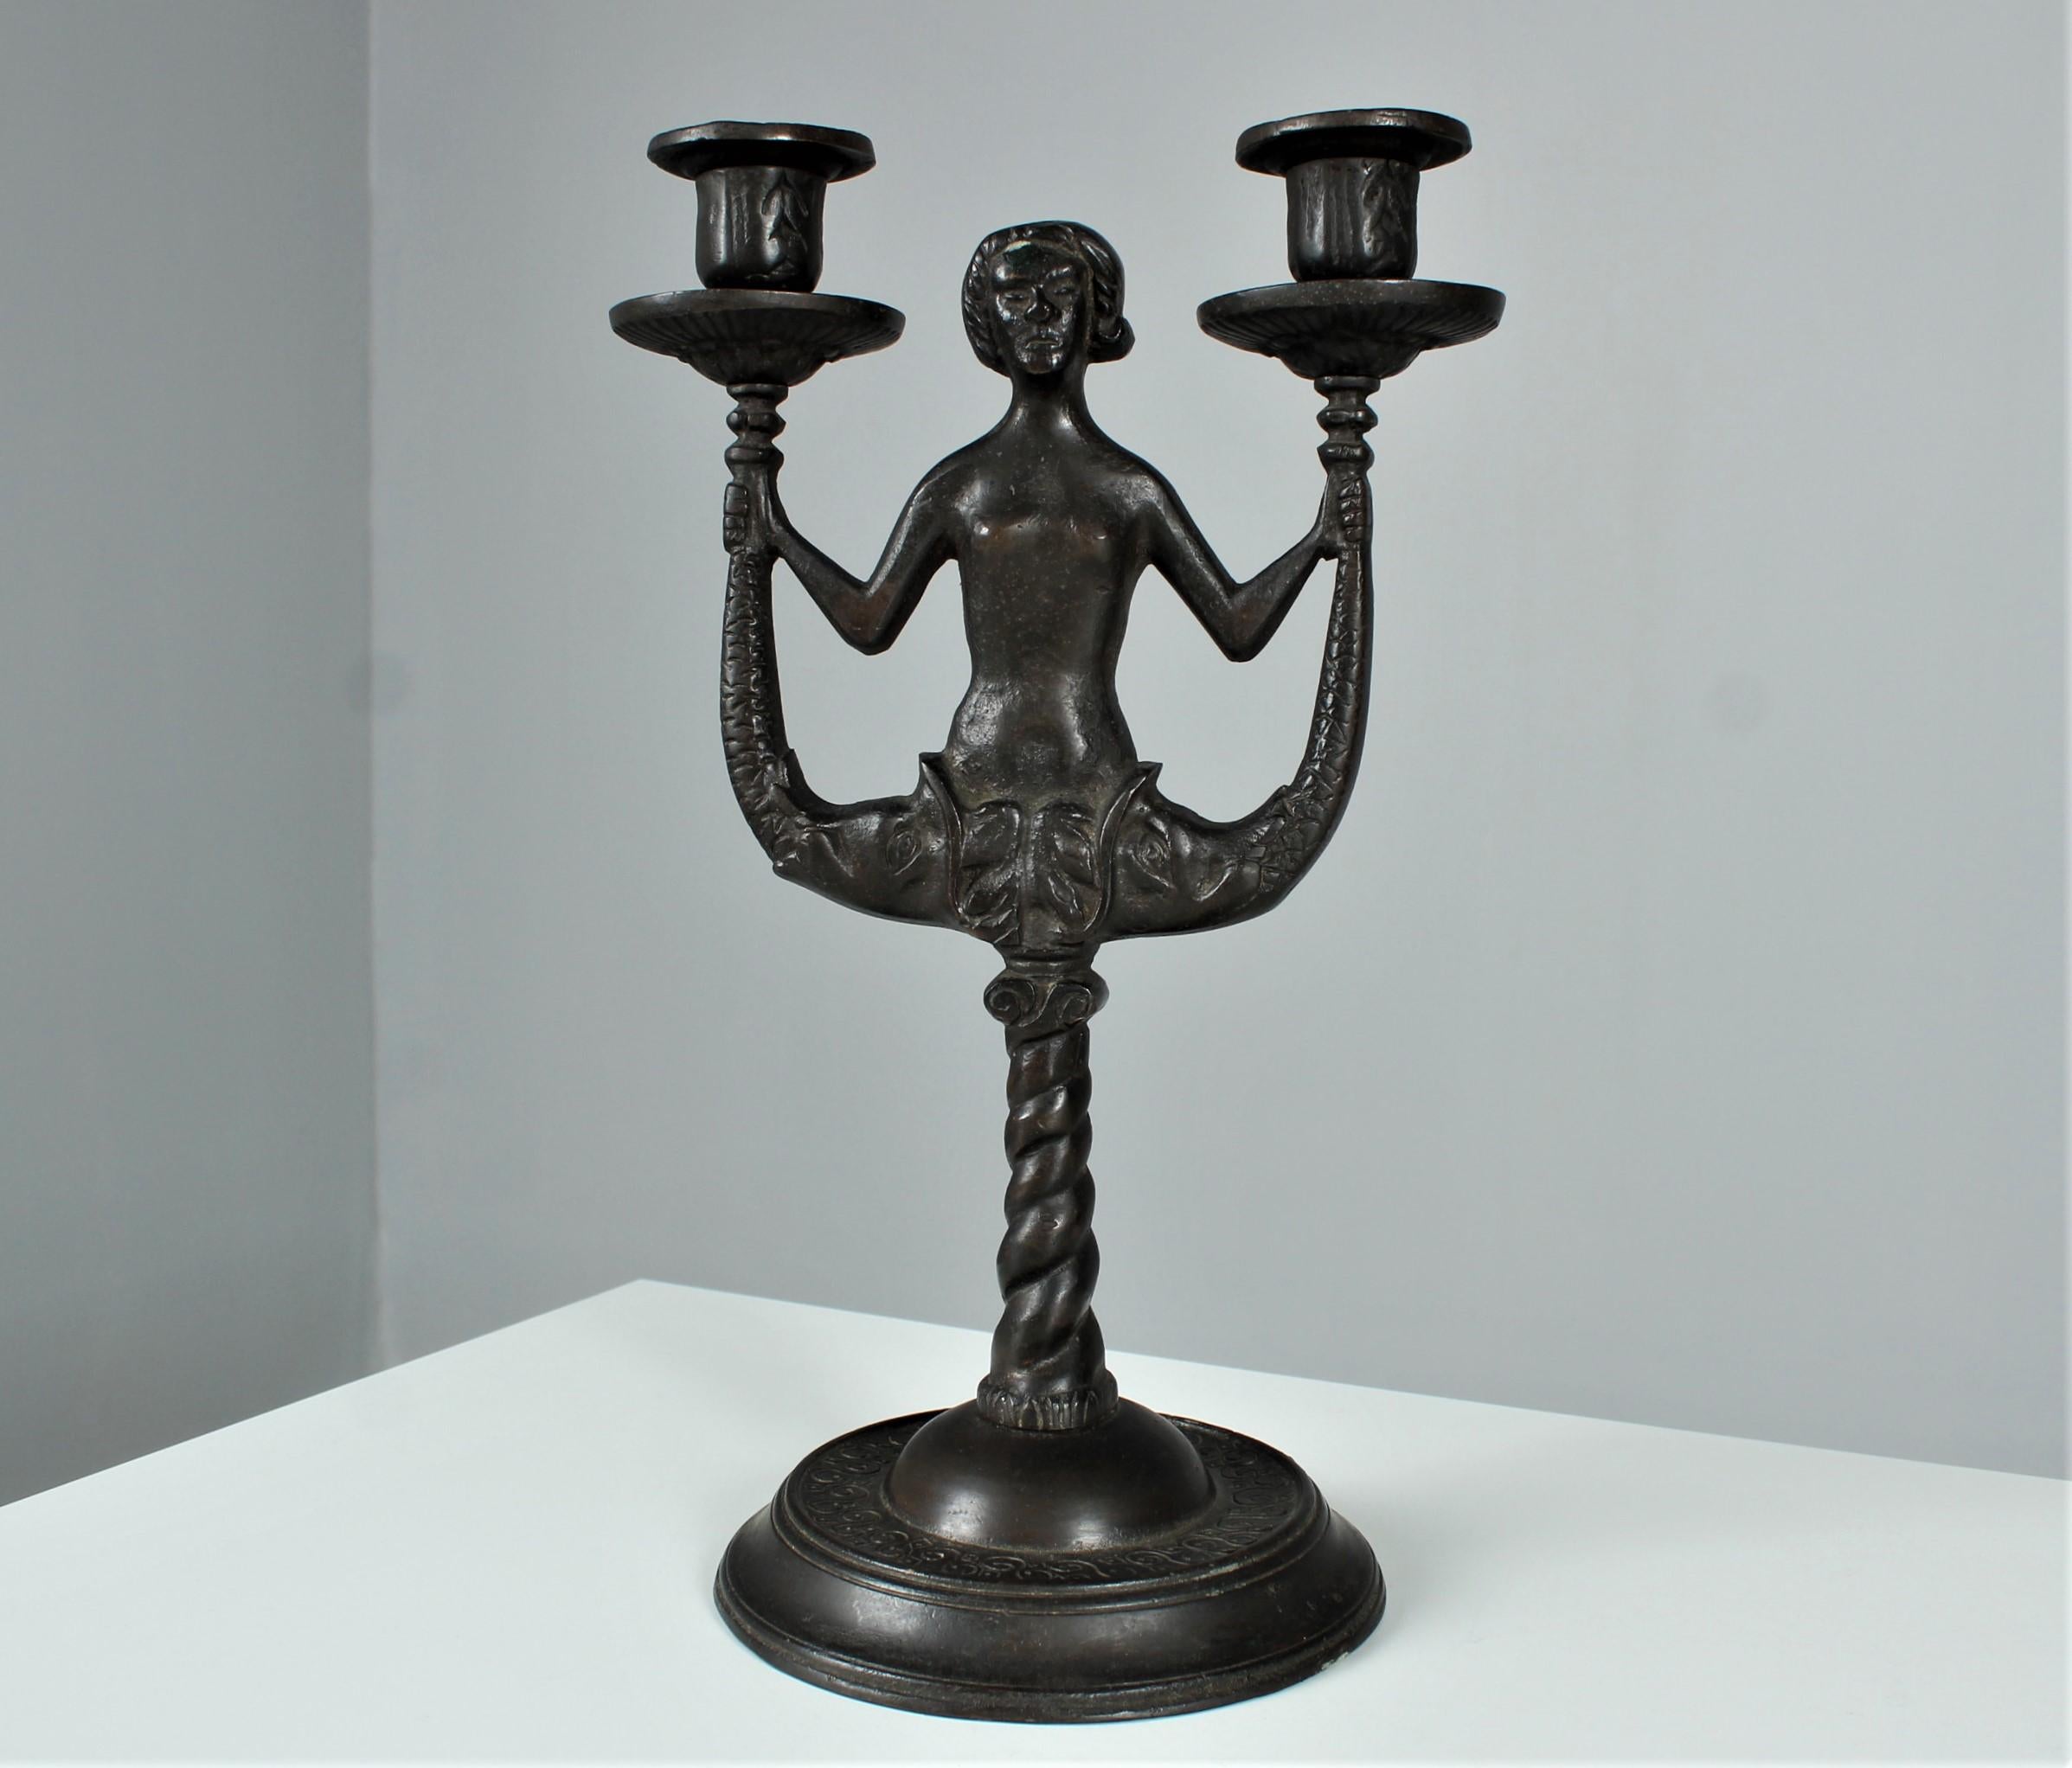 Exceptional antique candlestick made of patinated bronze.
Great very heavy bronze work.
Depicting a fantasized figure with two fish instead of legs.
Probably France, around 1920 / 1930.